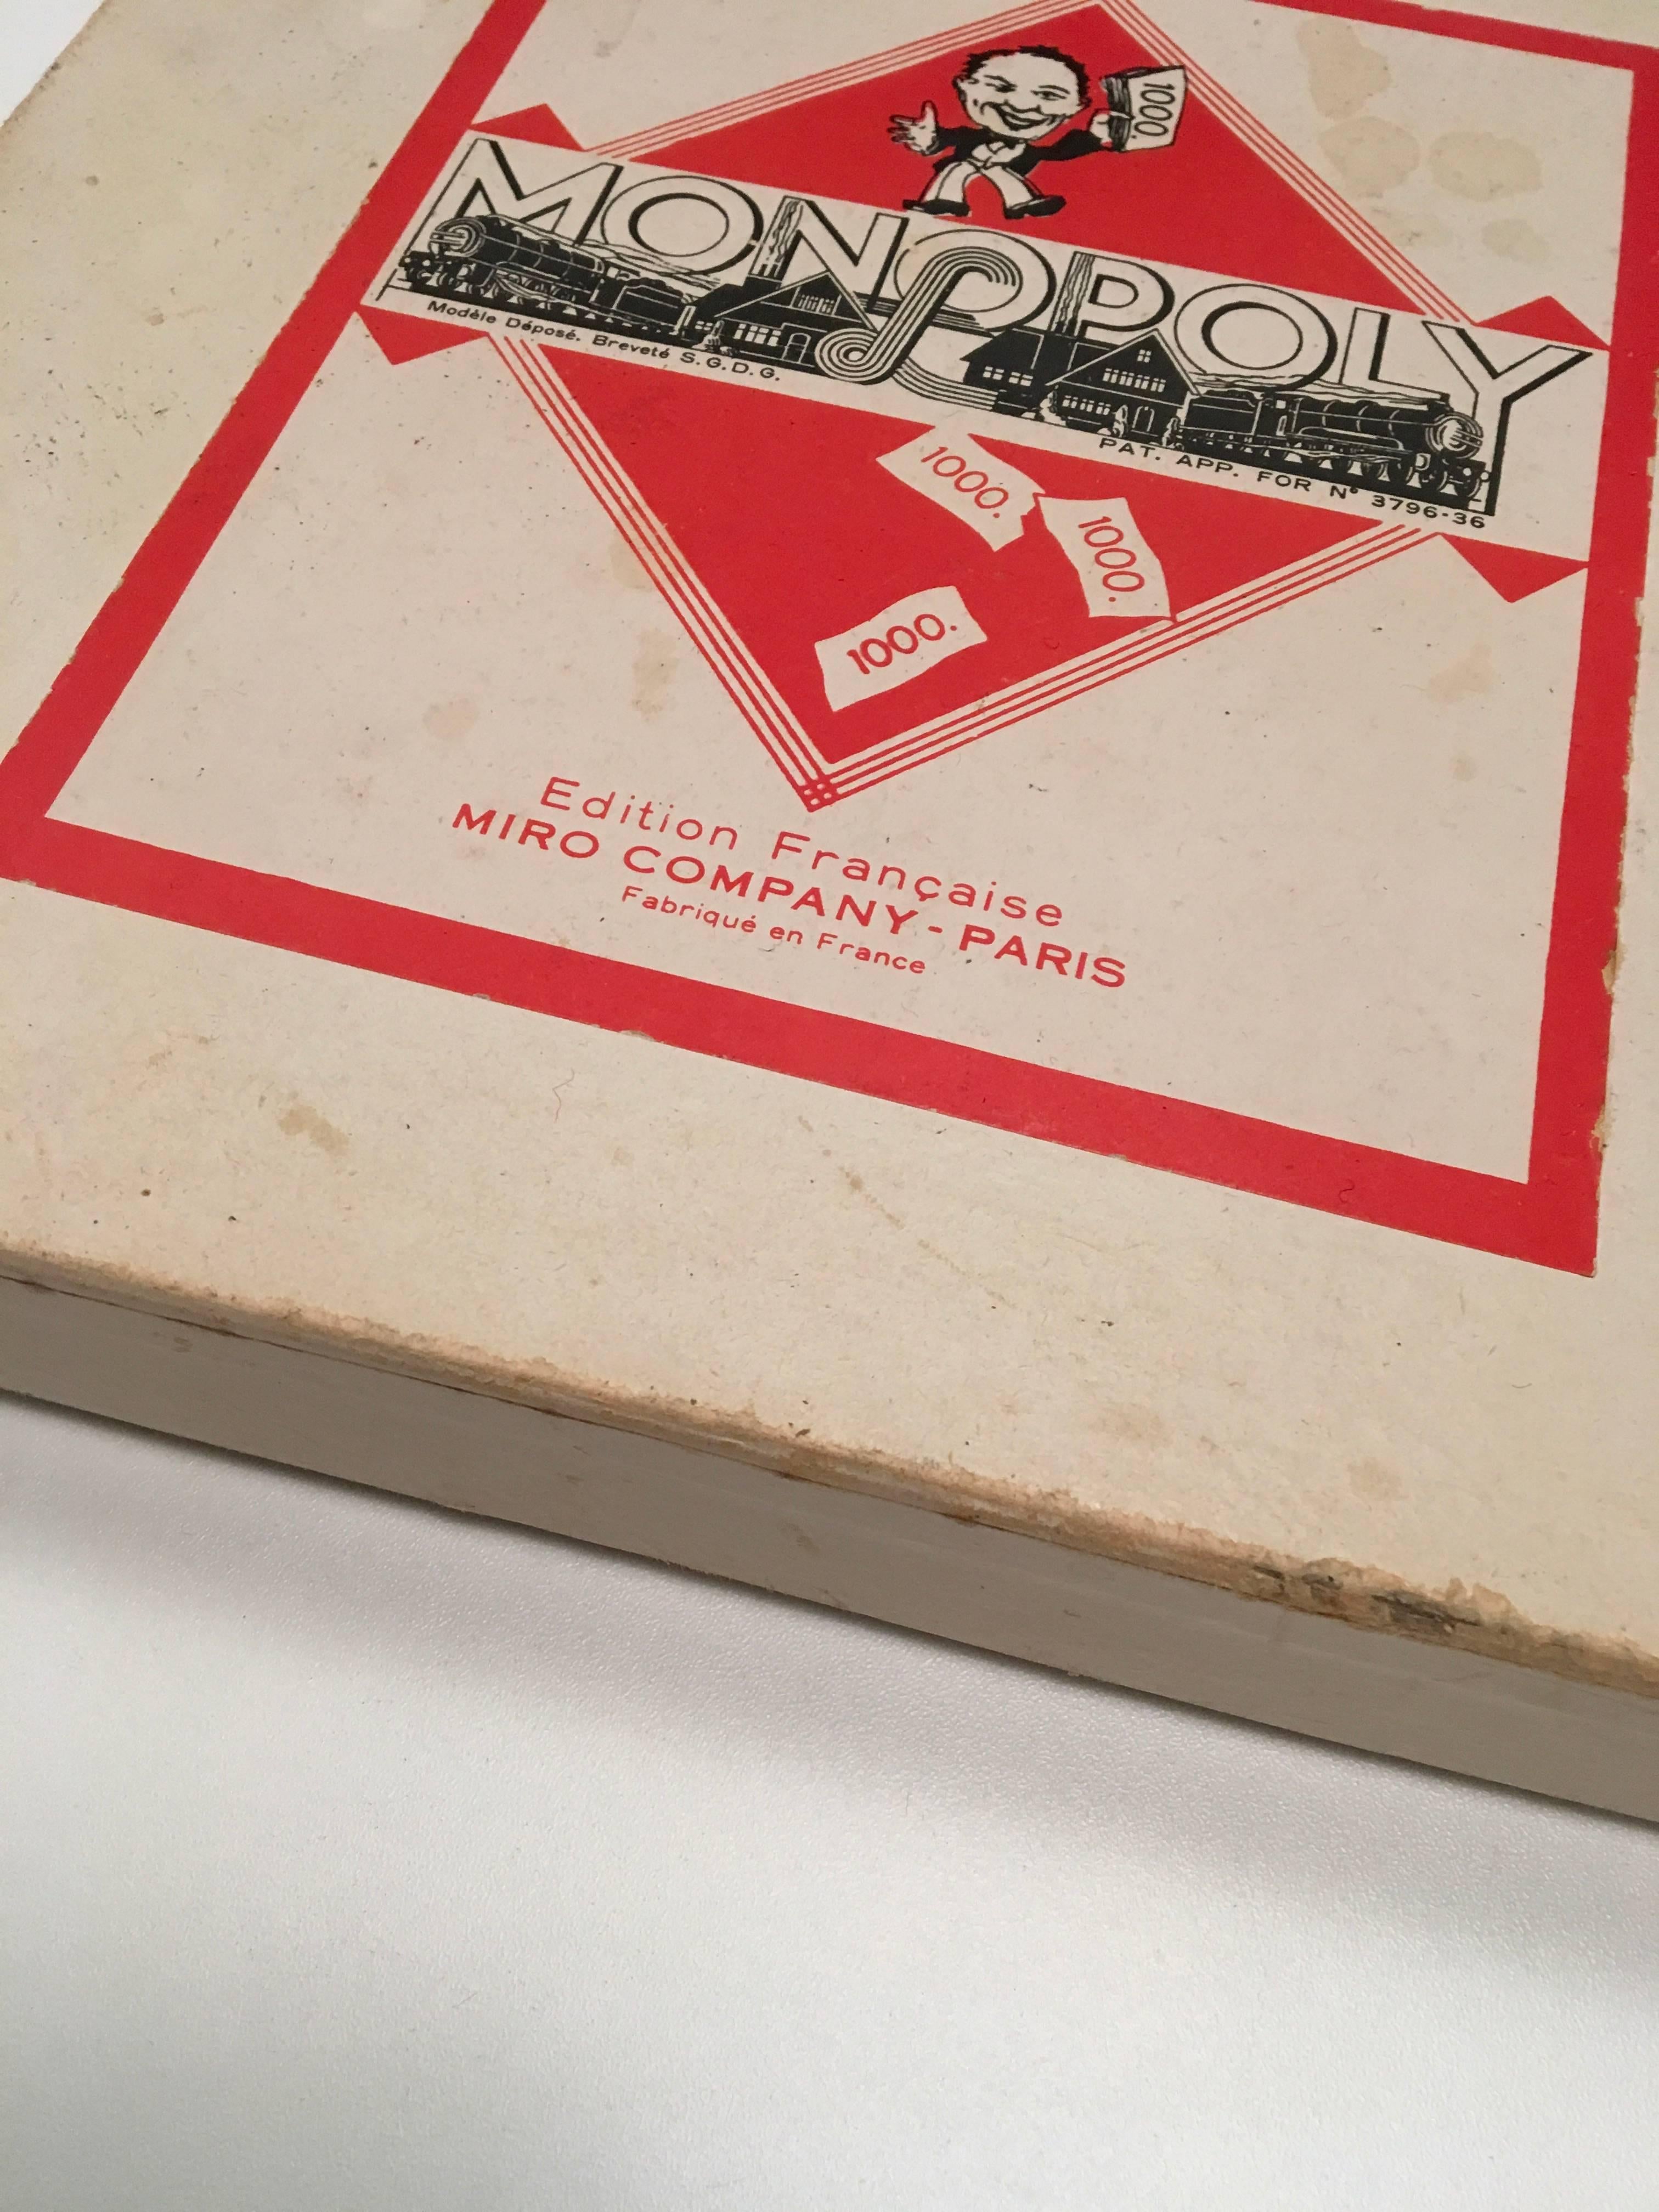 Vintage Monopoly Game - 1957 - French Edition - Rare For Sale 1